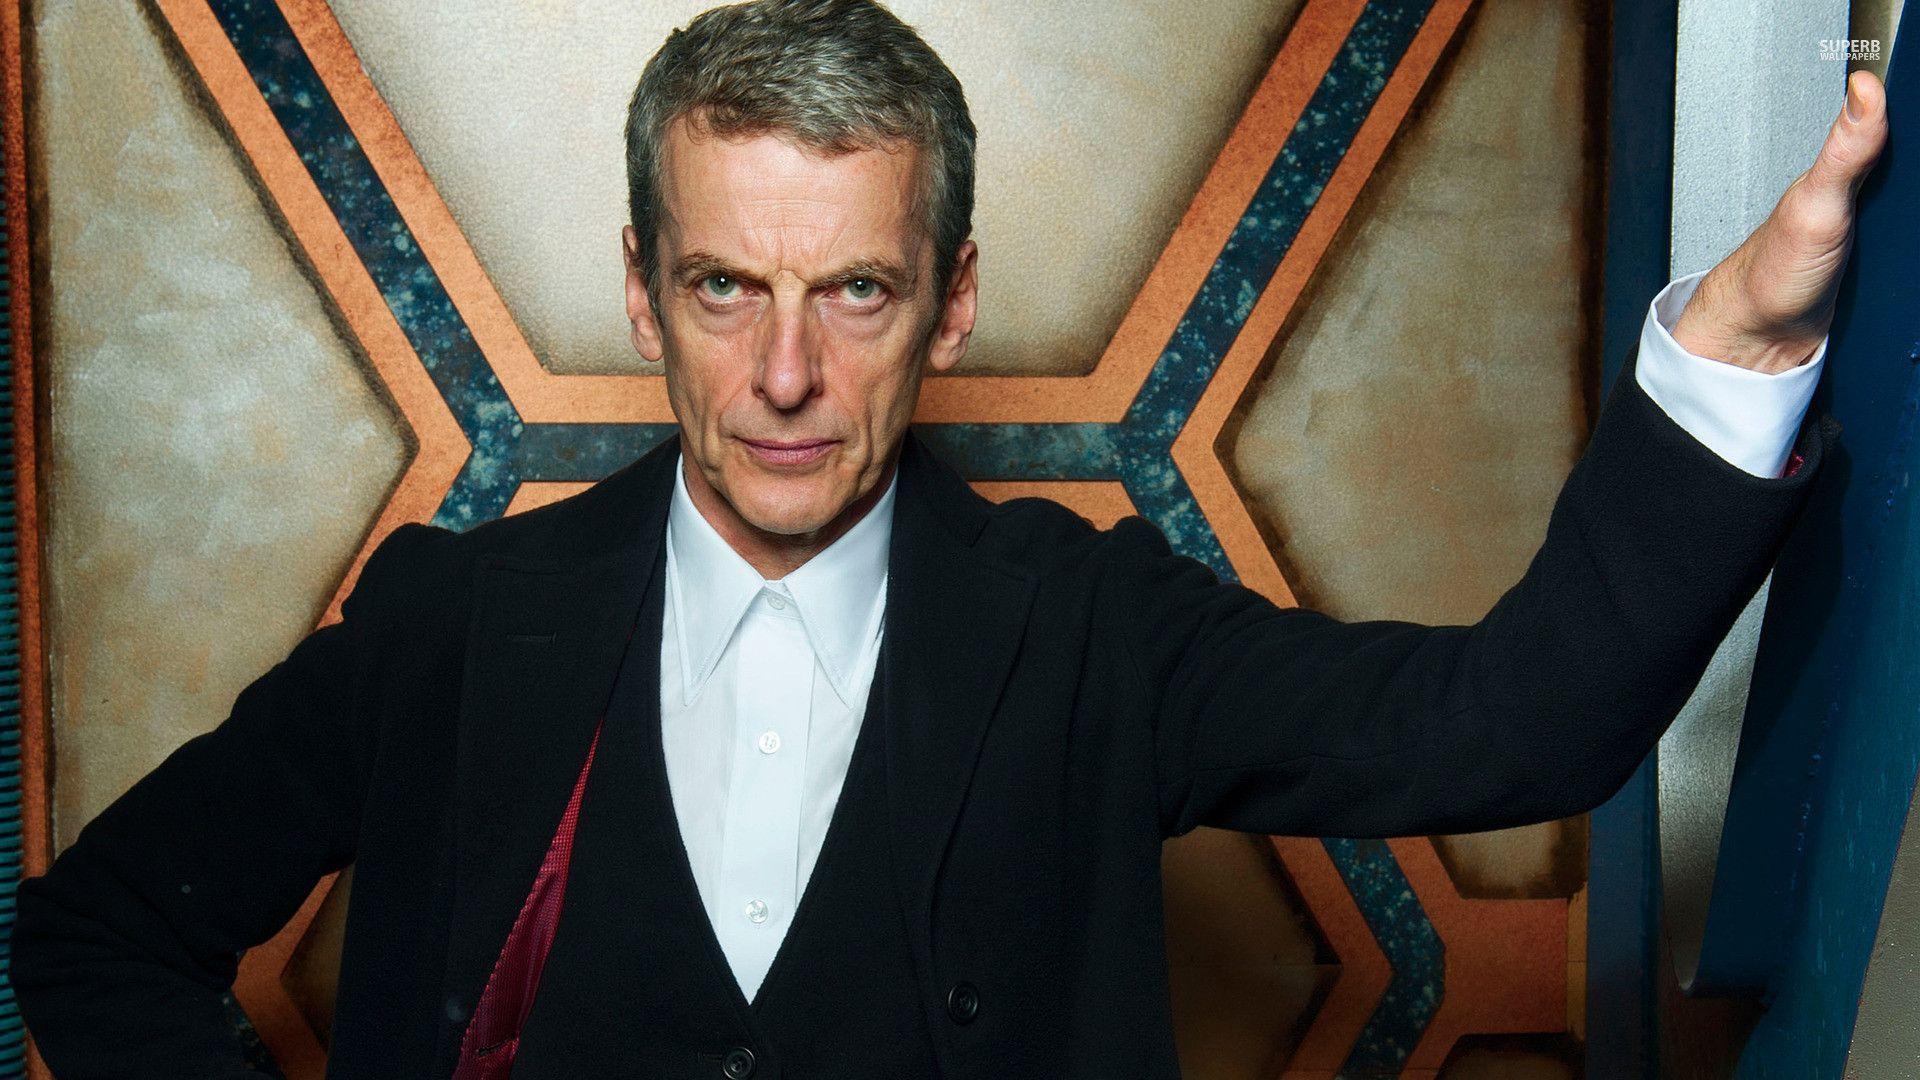 The 12th Doctor wallpaper Show wallpaper - #